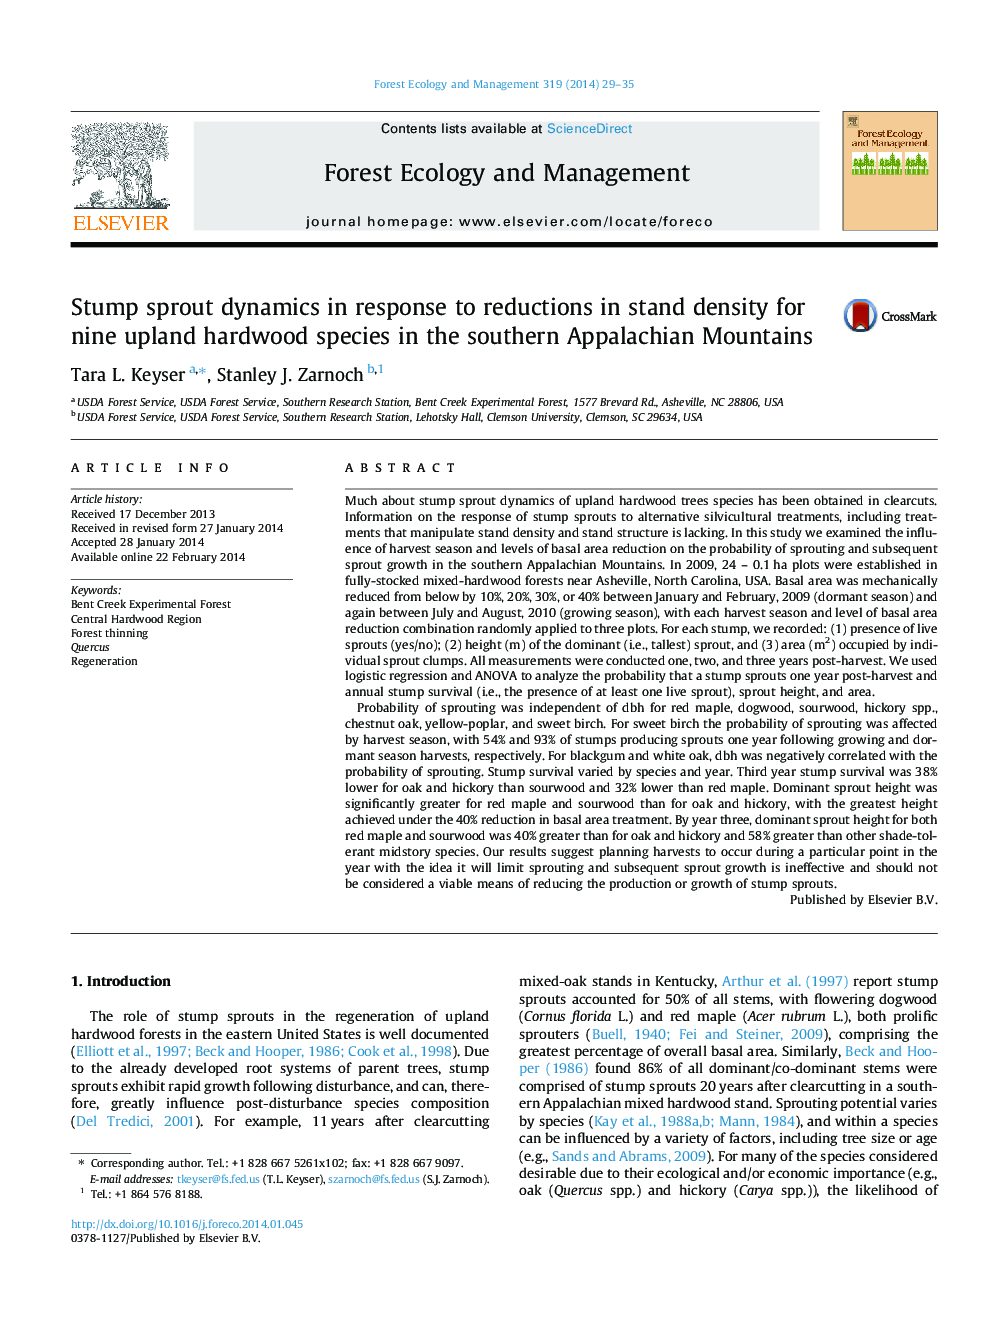 Stump sprout dynamics in response to reductions in stand density for nine upland hardwood species in the southern Appalachian Mountains